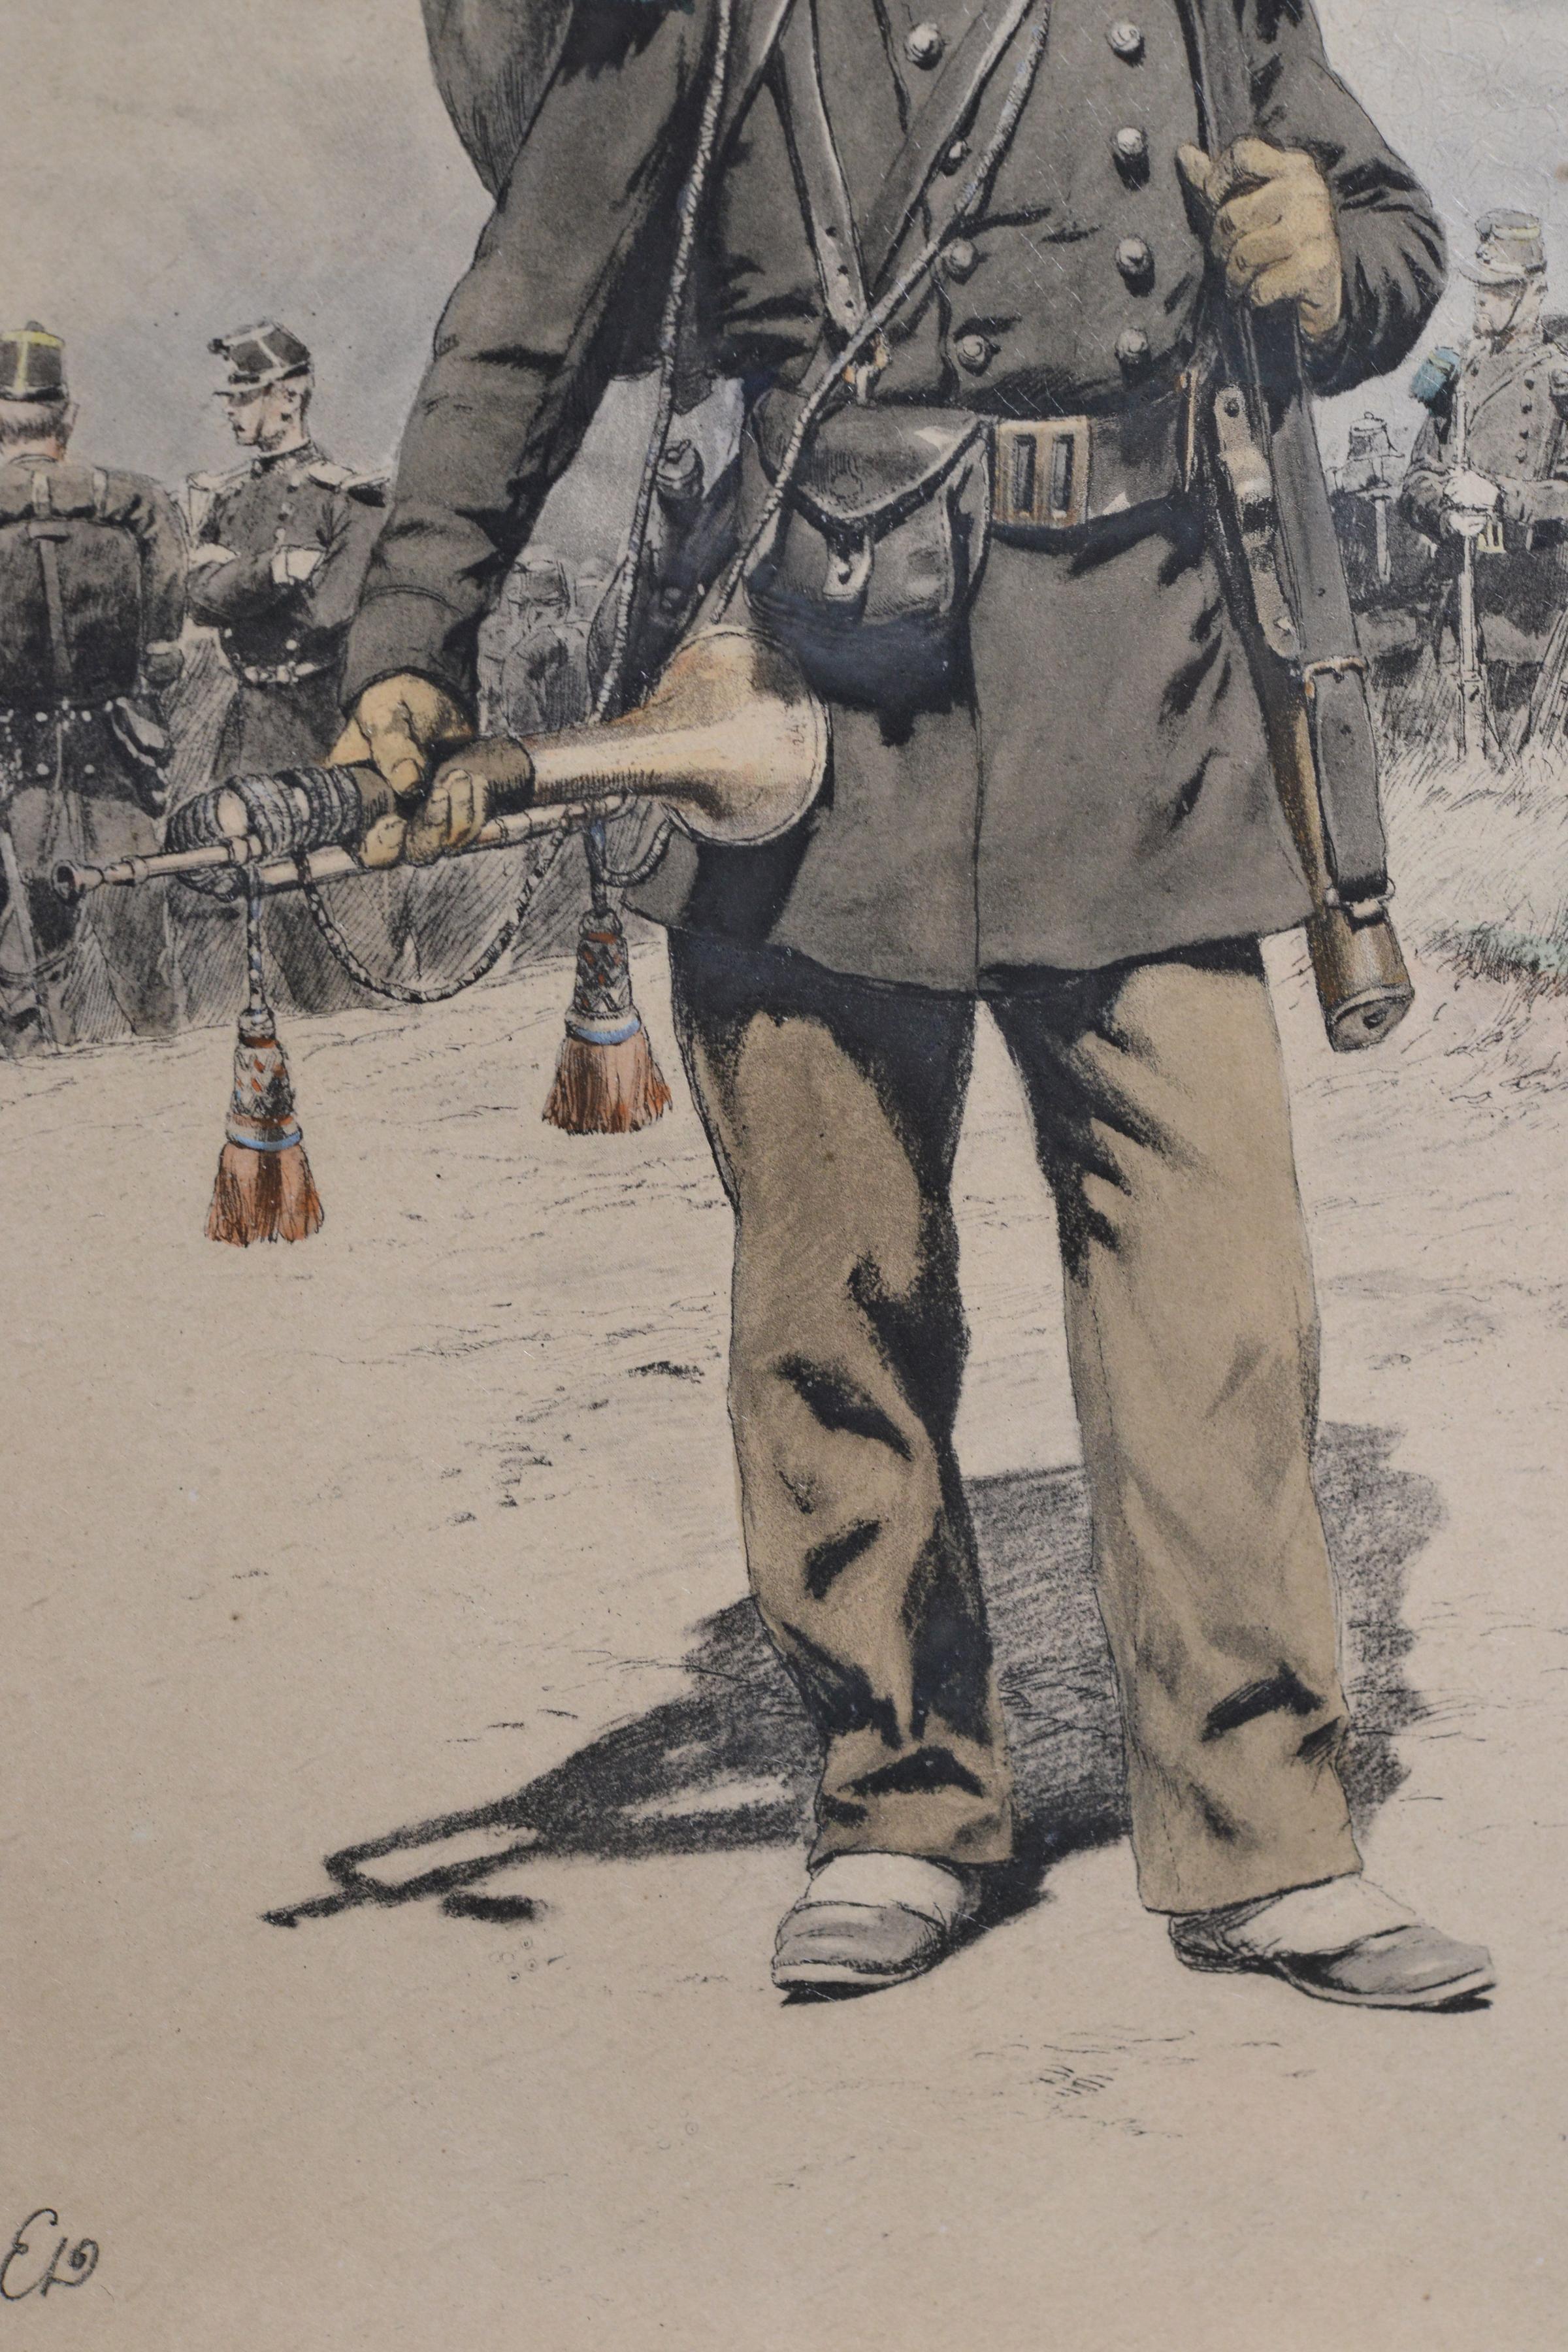 Bugler Foot Hunter, 1870 (lithographed facsimile 1883), Illustration after Édouard Detaille (1848 - 1912), similar in Musée de Nuits-Saint-Georges. This illustration shows a bugler from the 20th Chasseurs Battalion. 